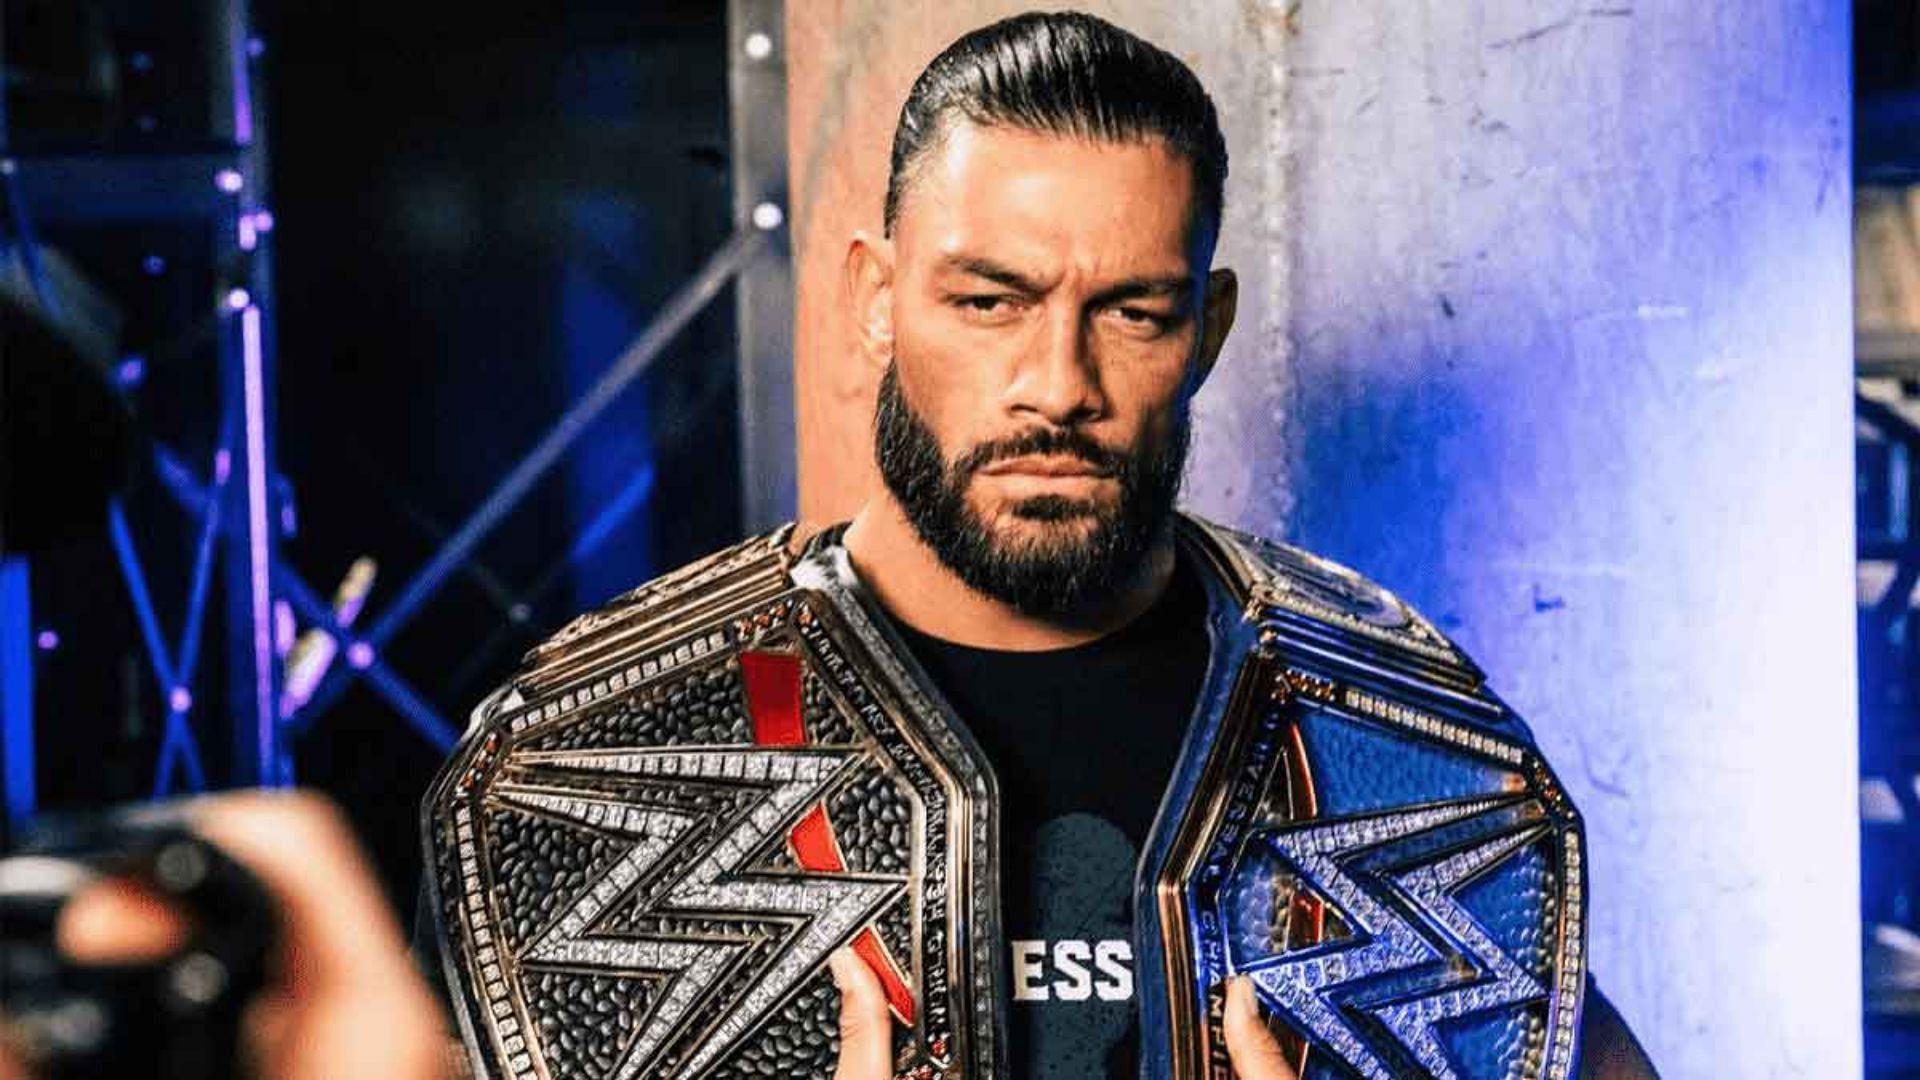 Roman is the reigning Undisputed WWE Universal Champion.